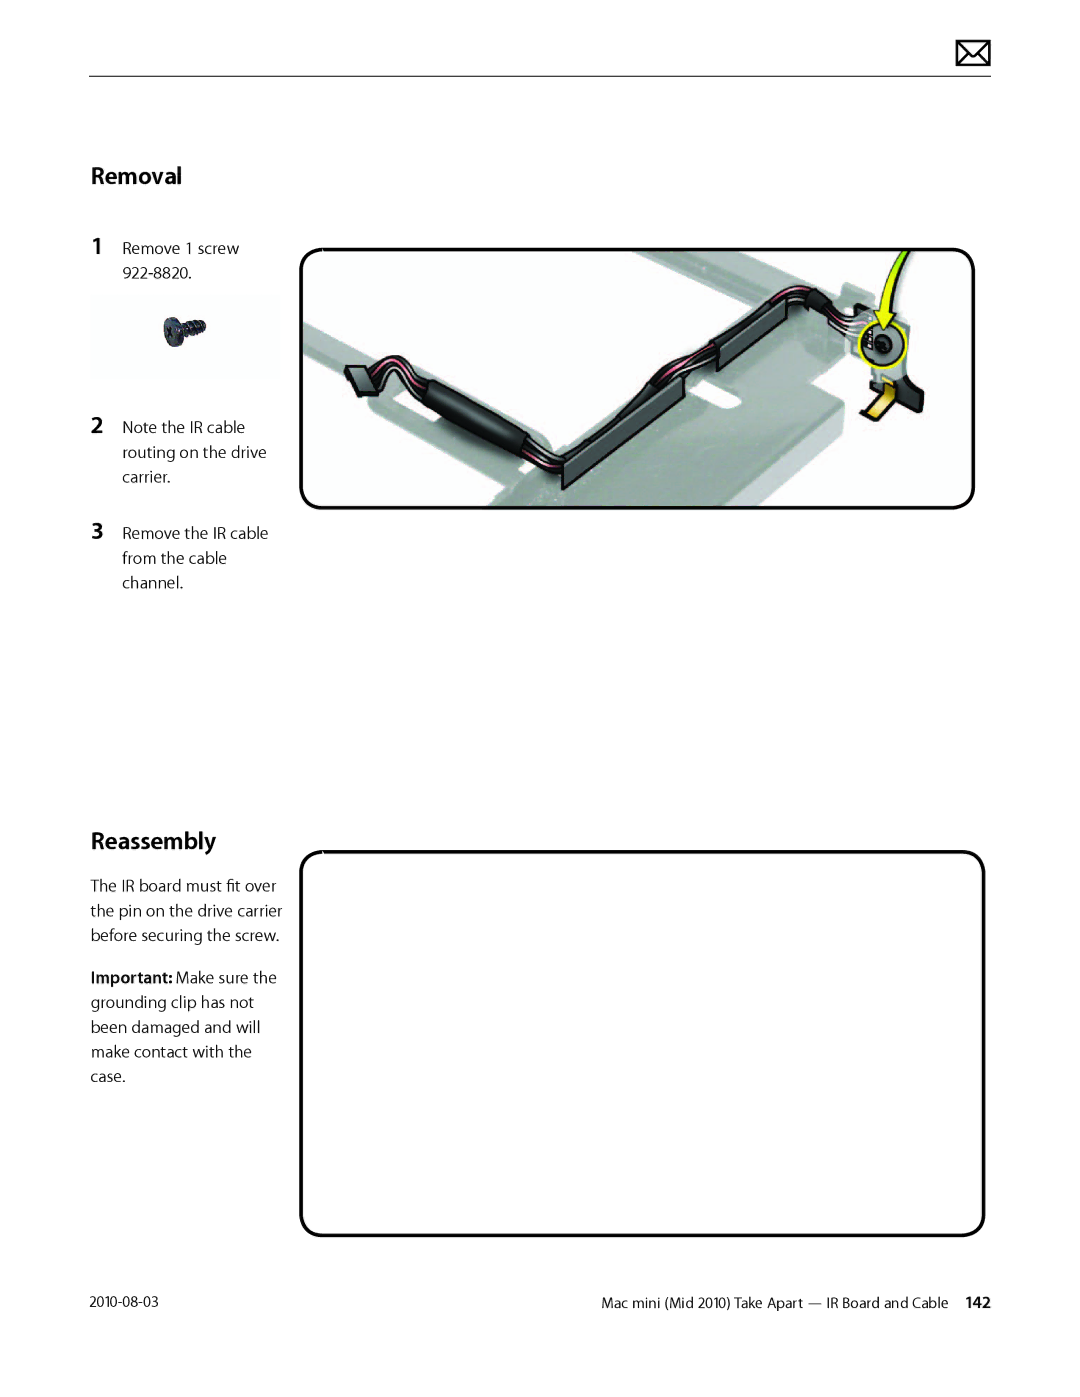 Apple Mac mini manual Remove the IR cable from the cable channel 